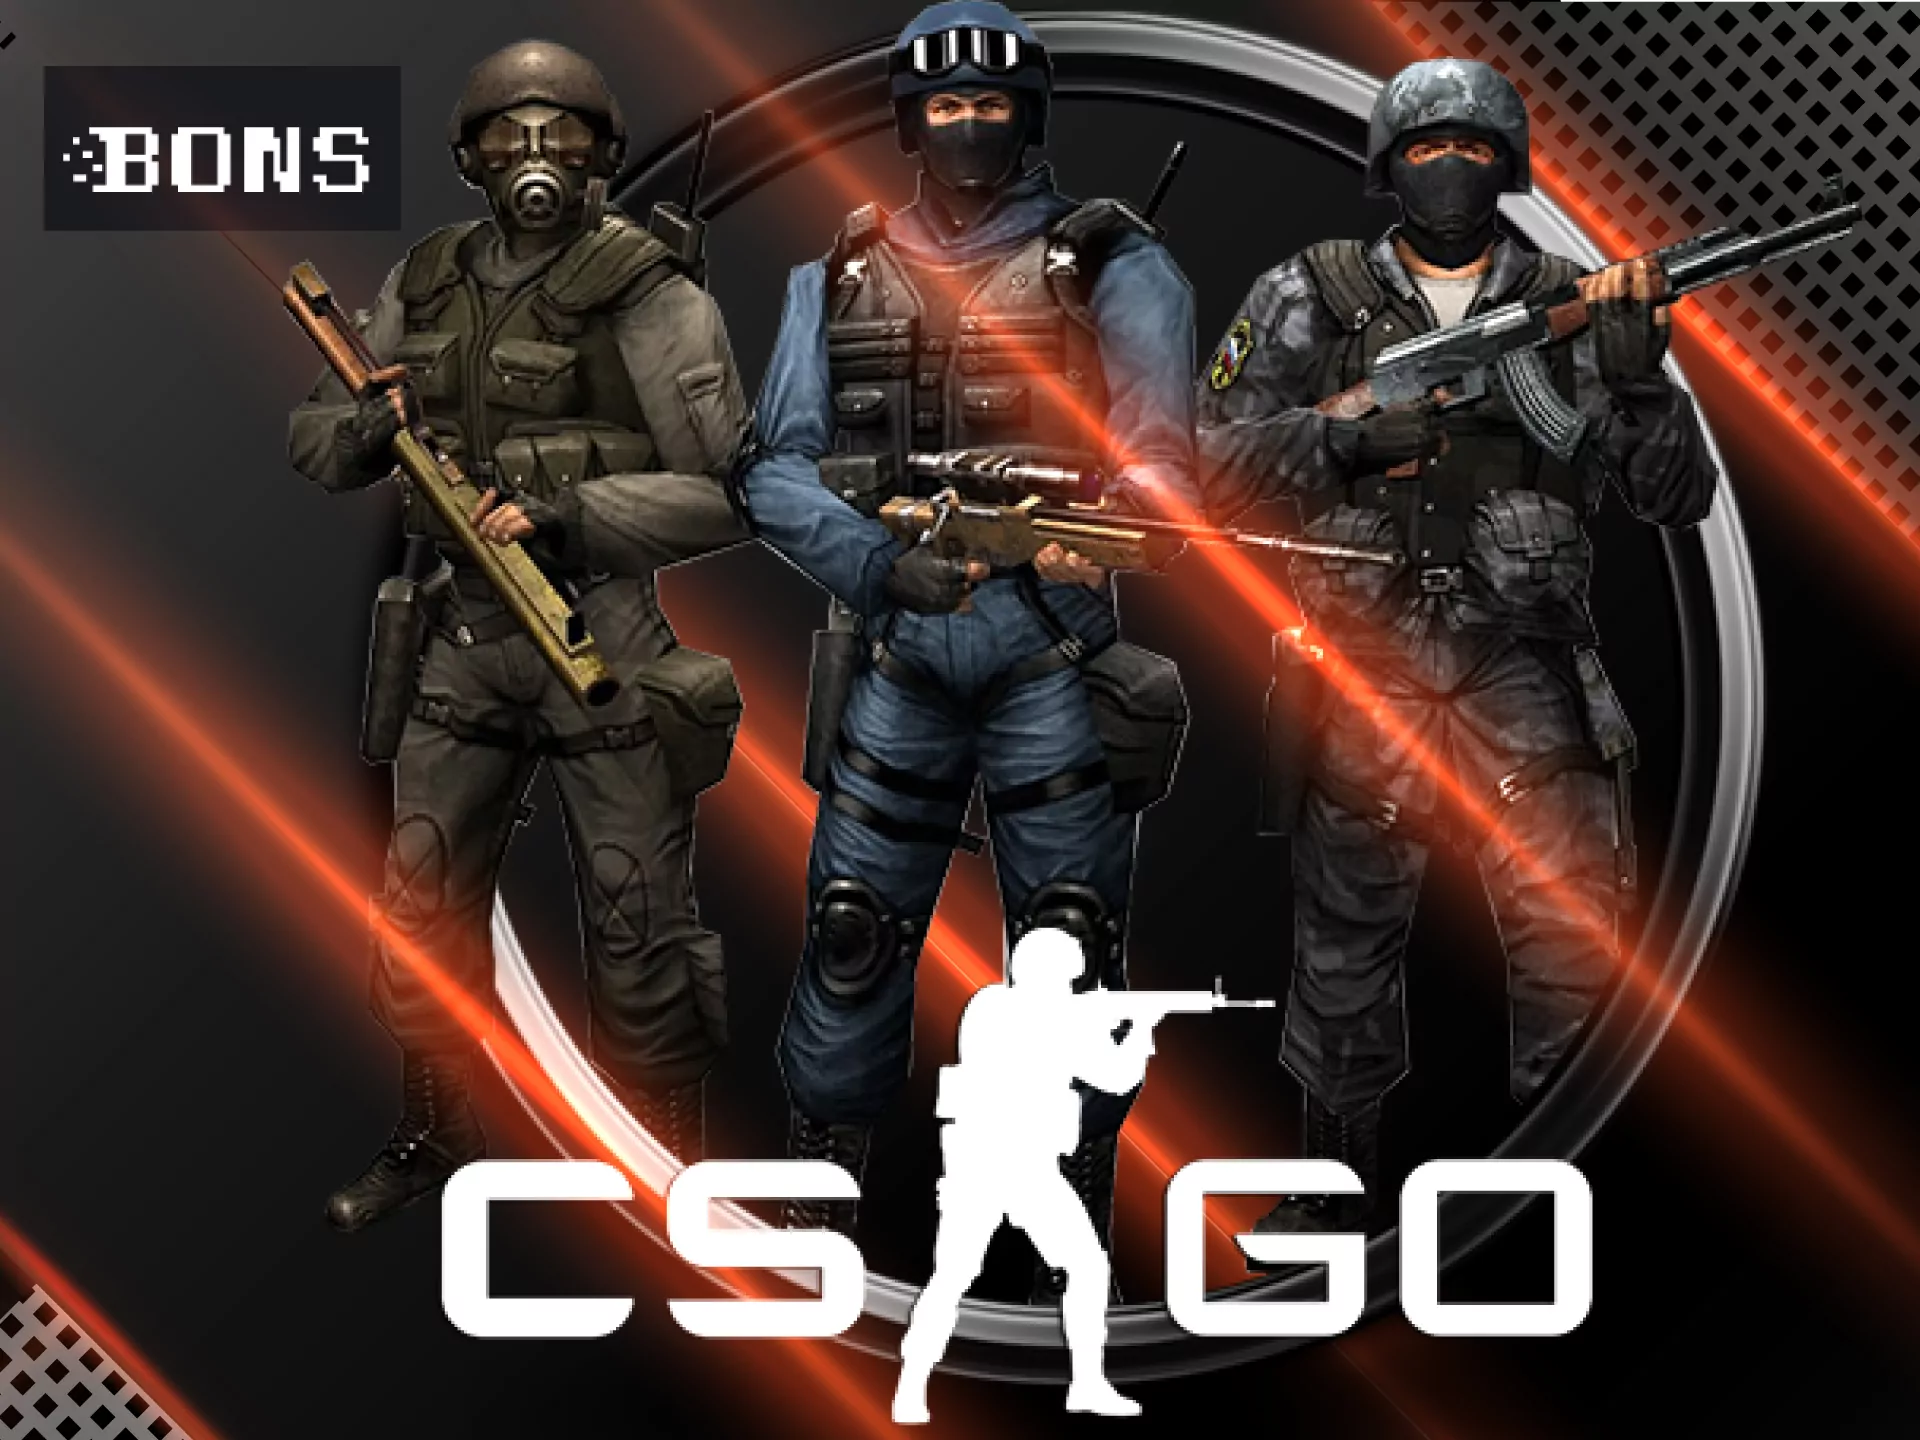 The CS:GO lovers can bet on this game at Bons.